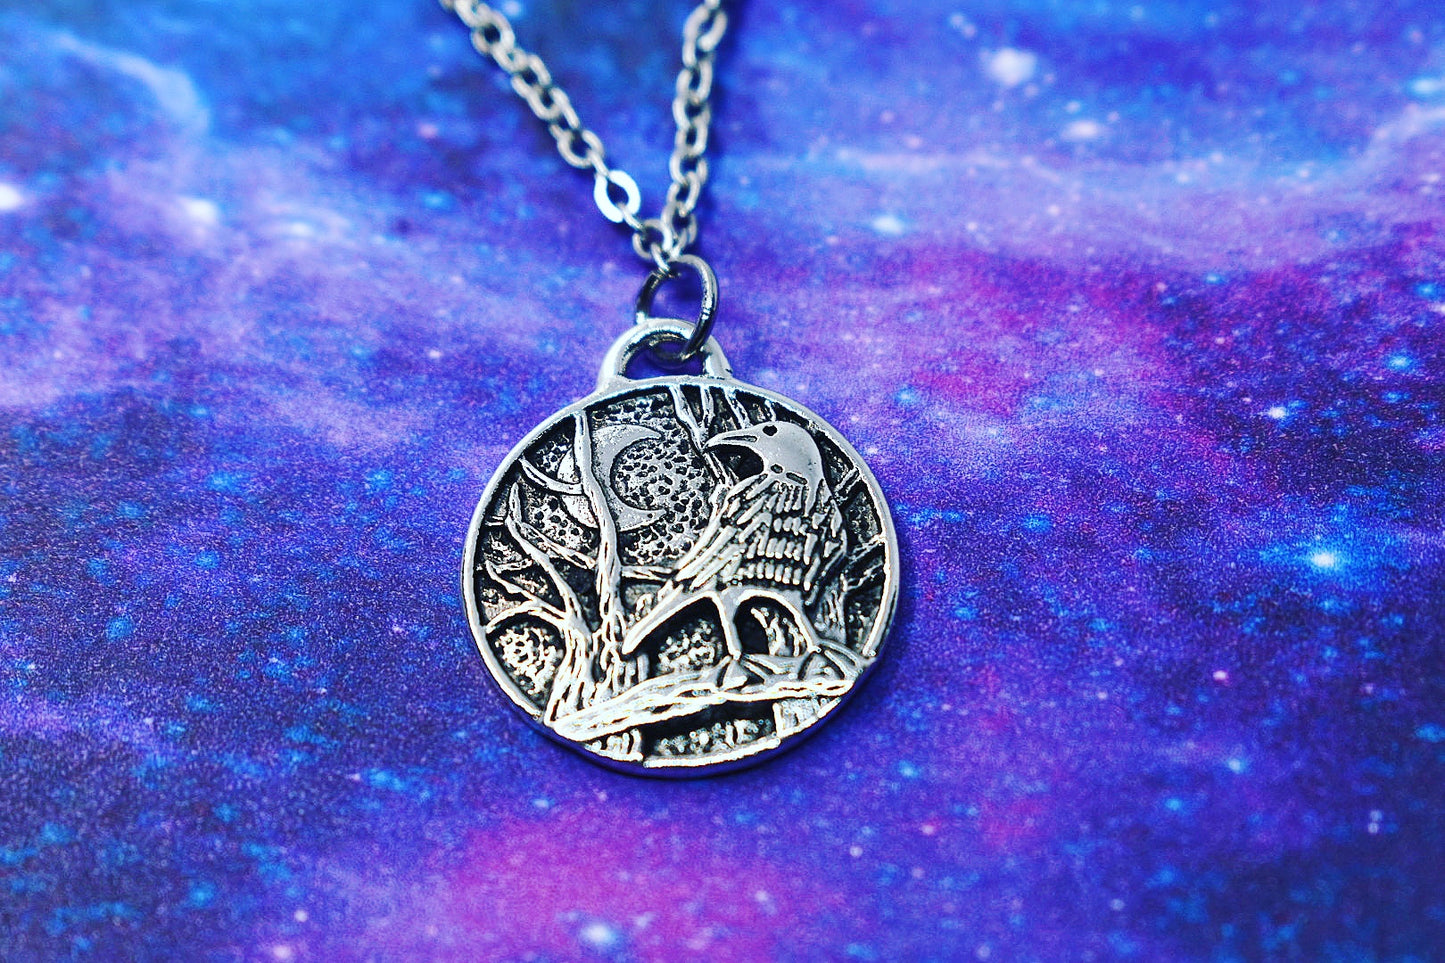 Necklace with raven and crescent moon